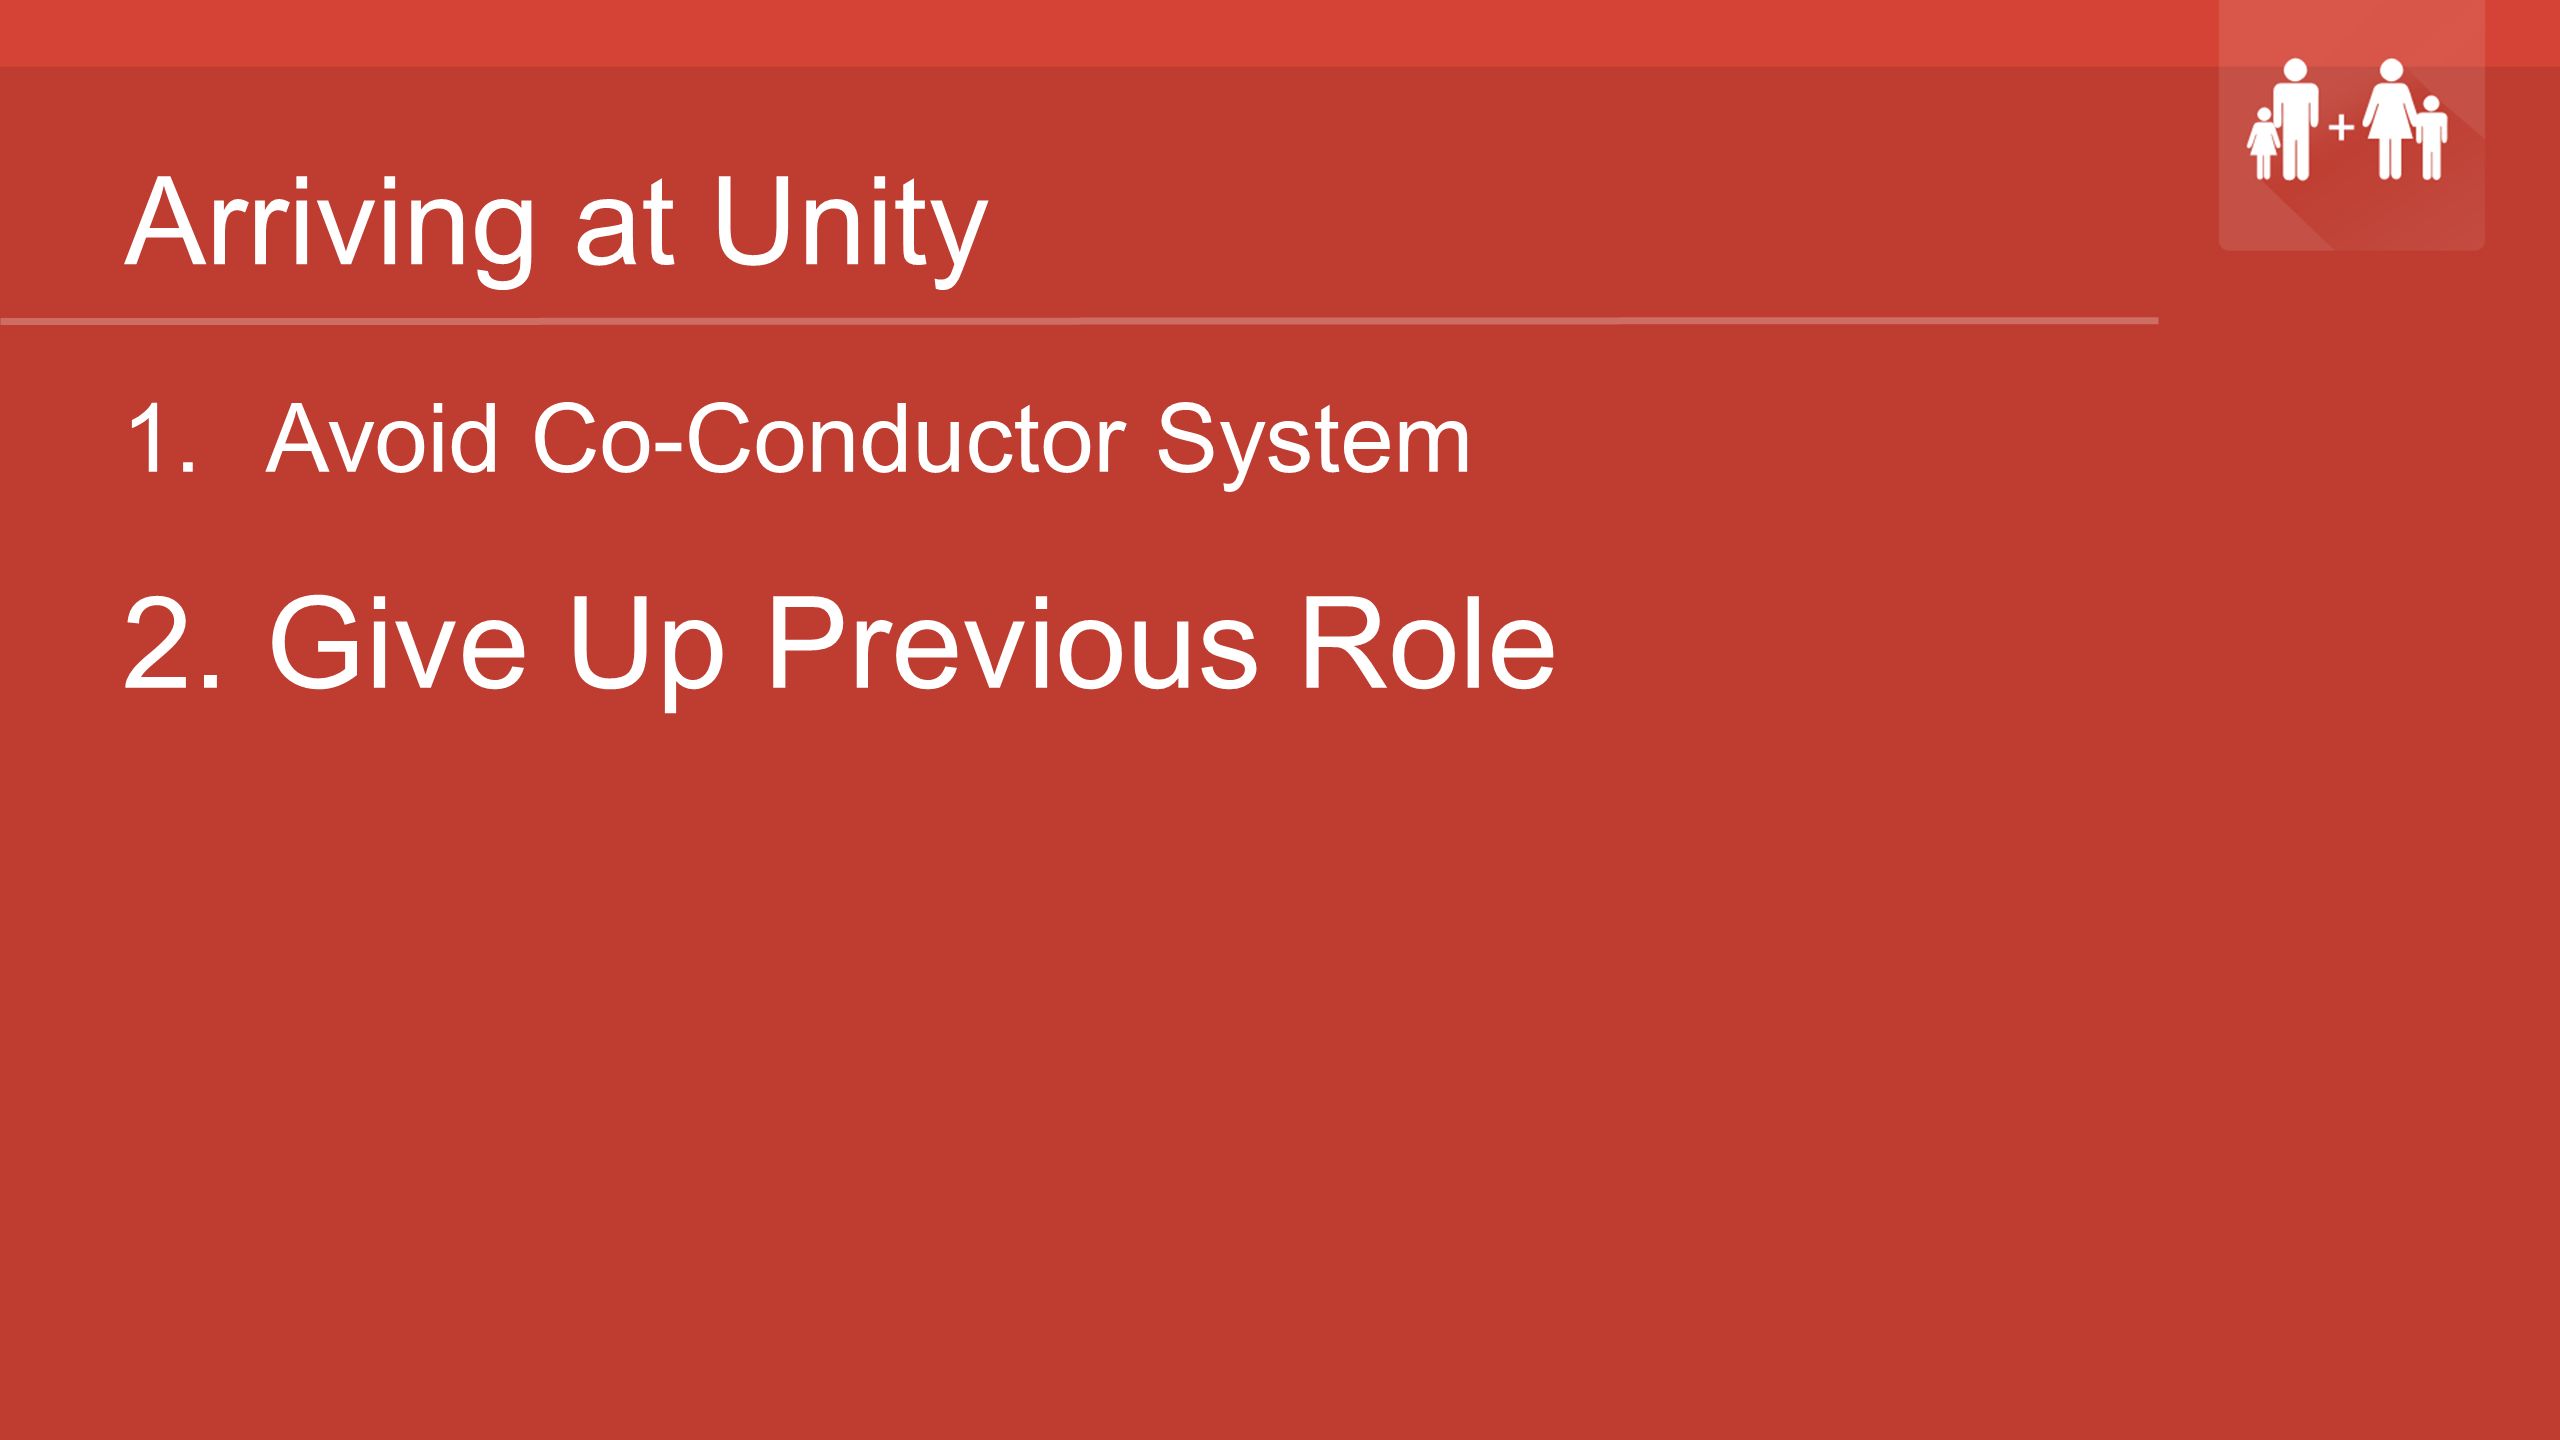 Arriving at Unity 1. Avoid Co-Conductor System 2. Give Up Previous Role